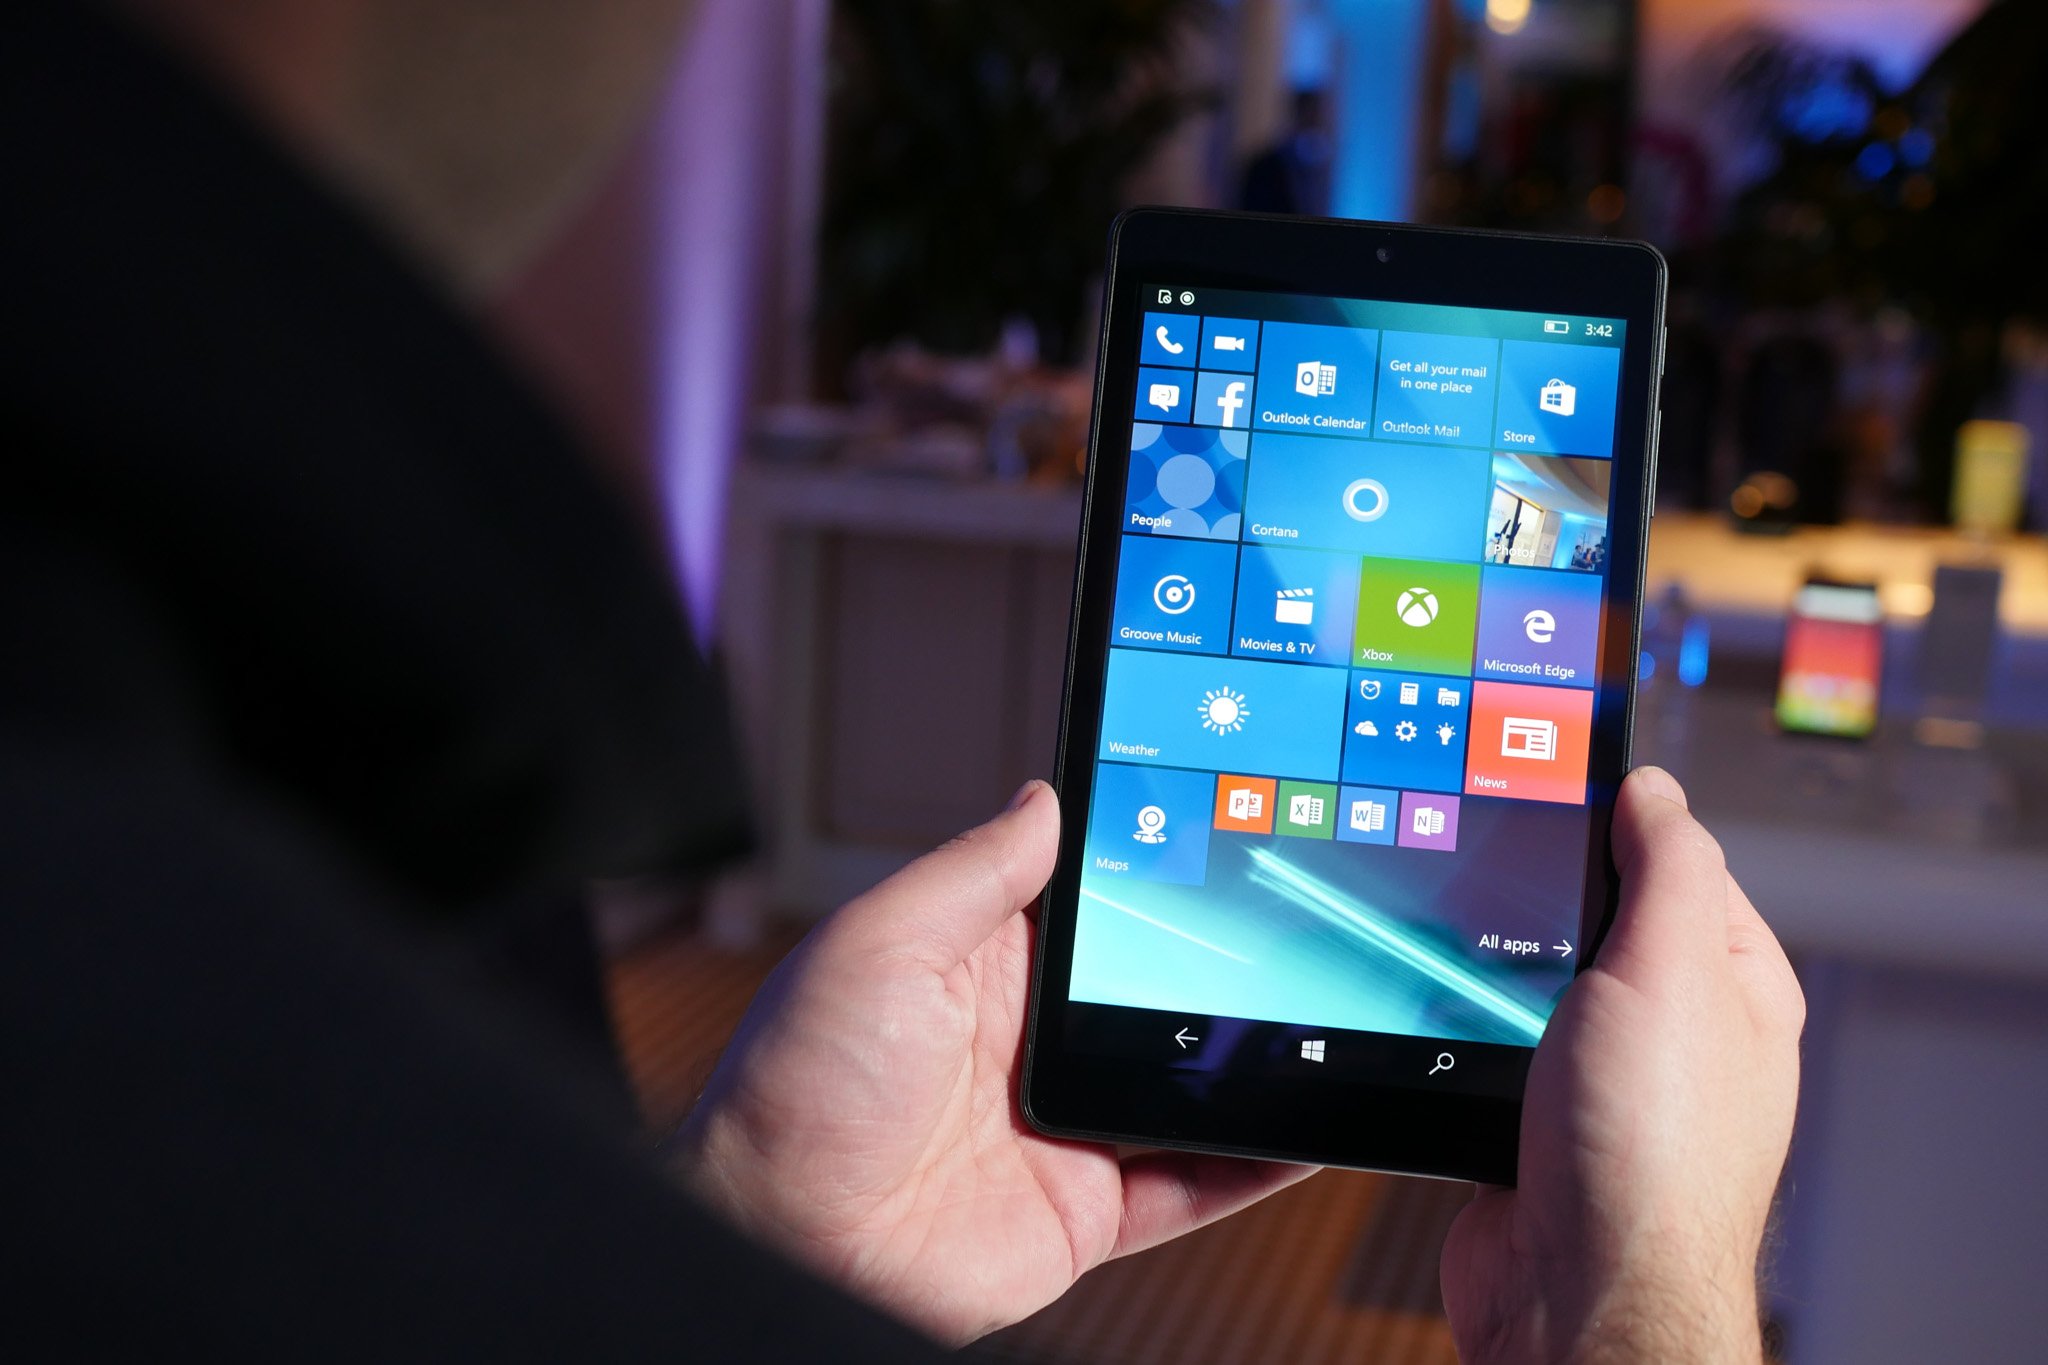 Alcatel OneTouch Pixi 3 with Windows 10 Mobile